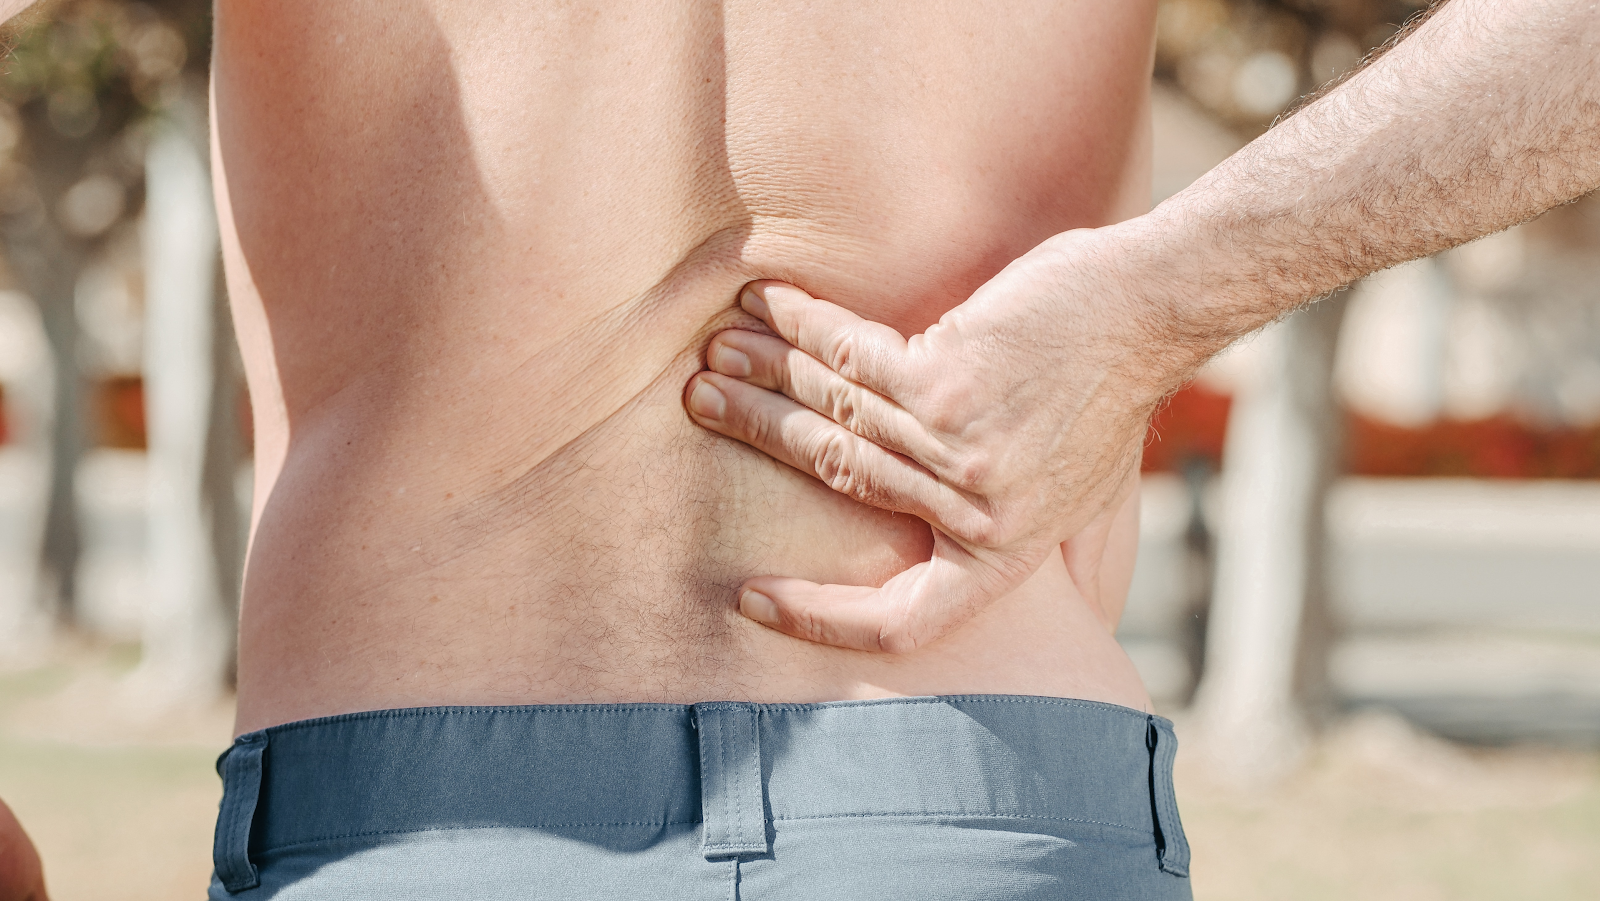 can chiropractic help with spinal stenosis?